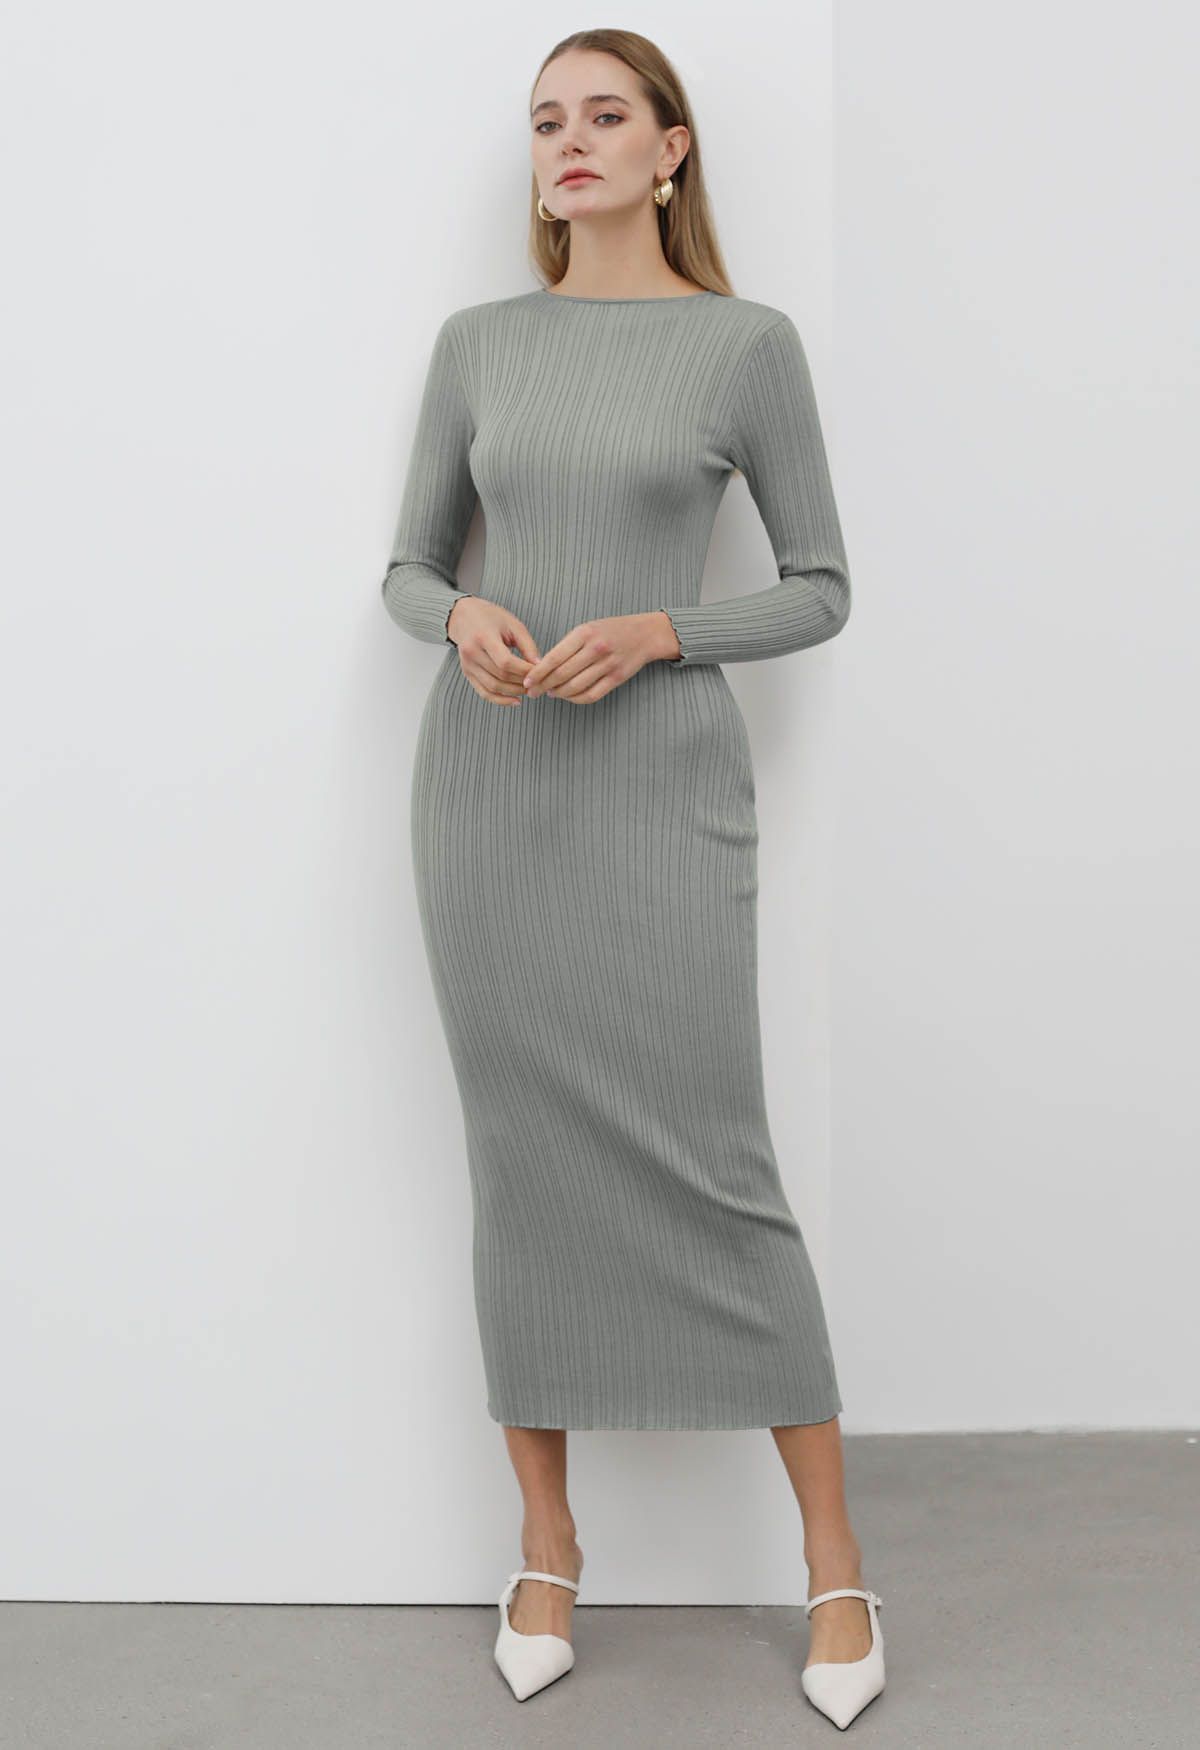 Stripe Texture Fitted Knit Maxi Dress in Pea Green